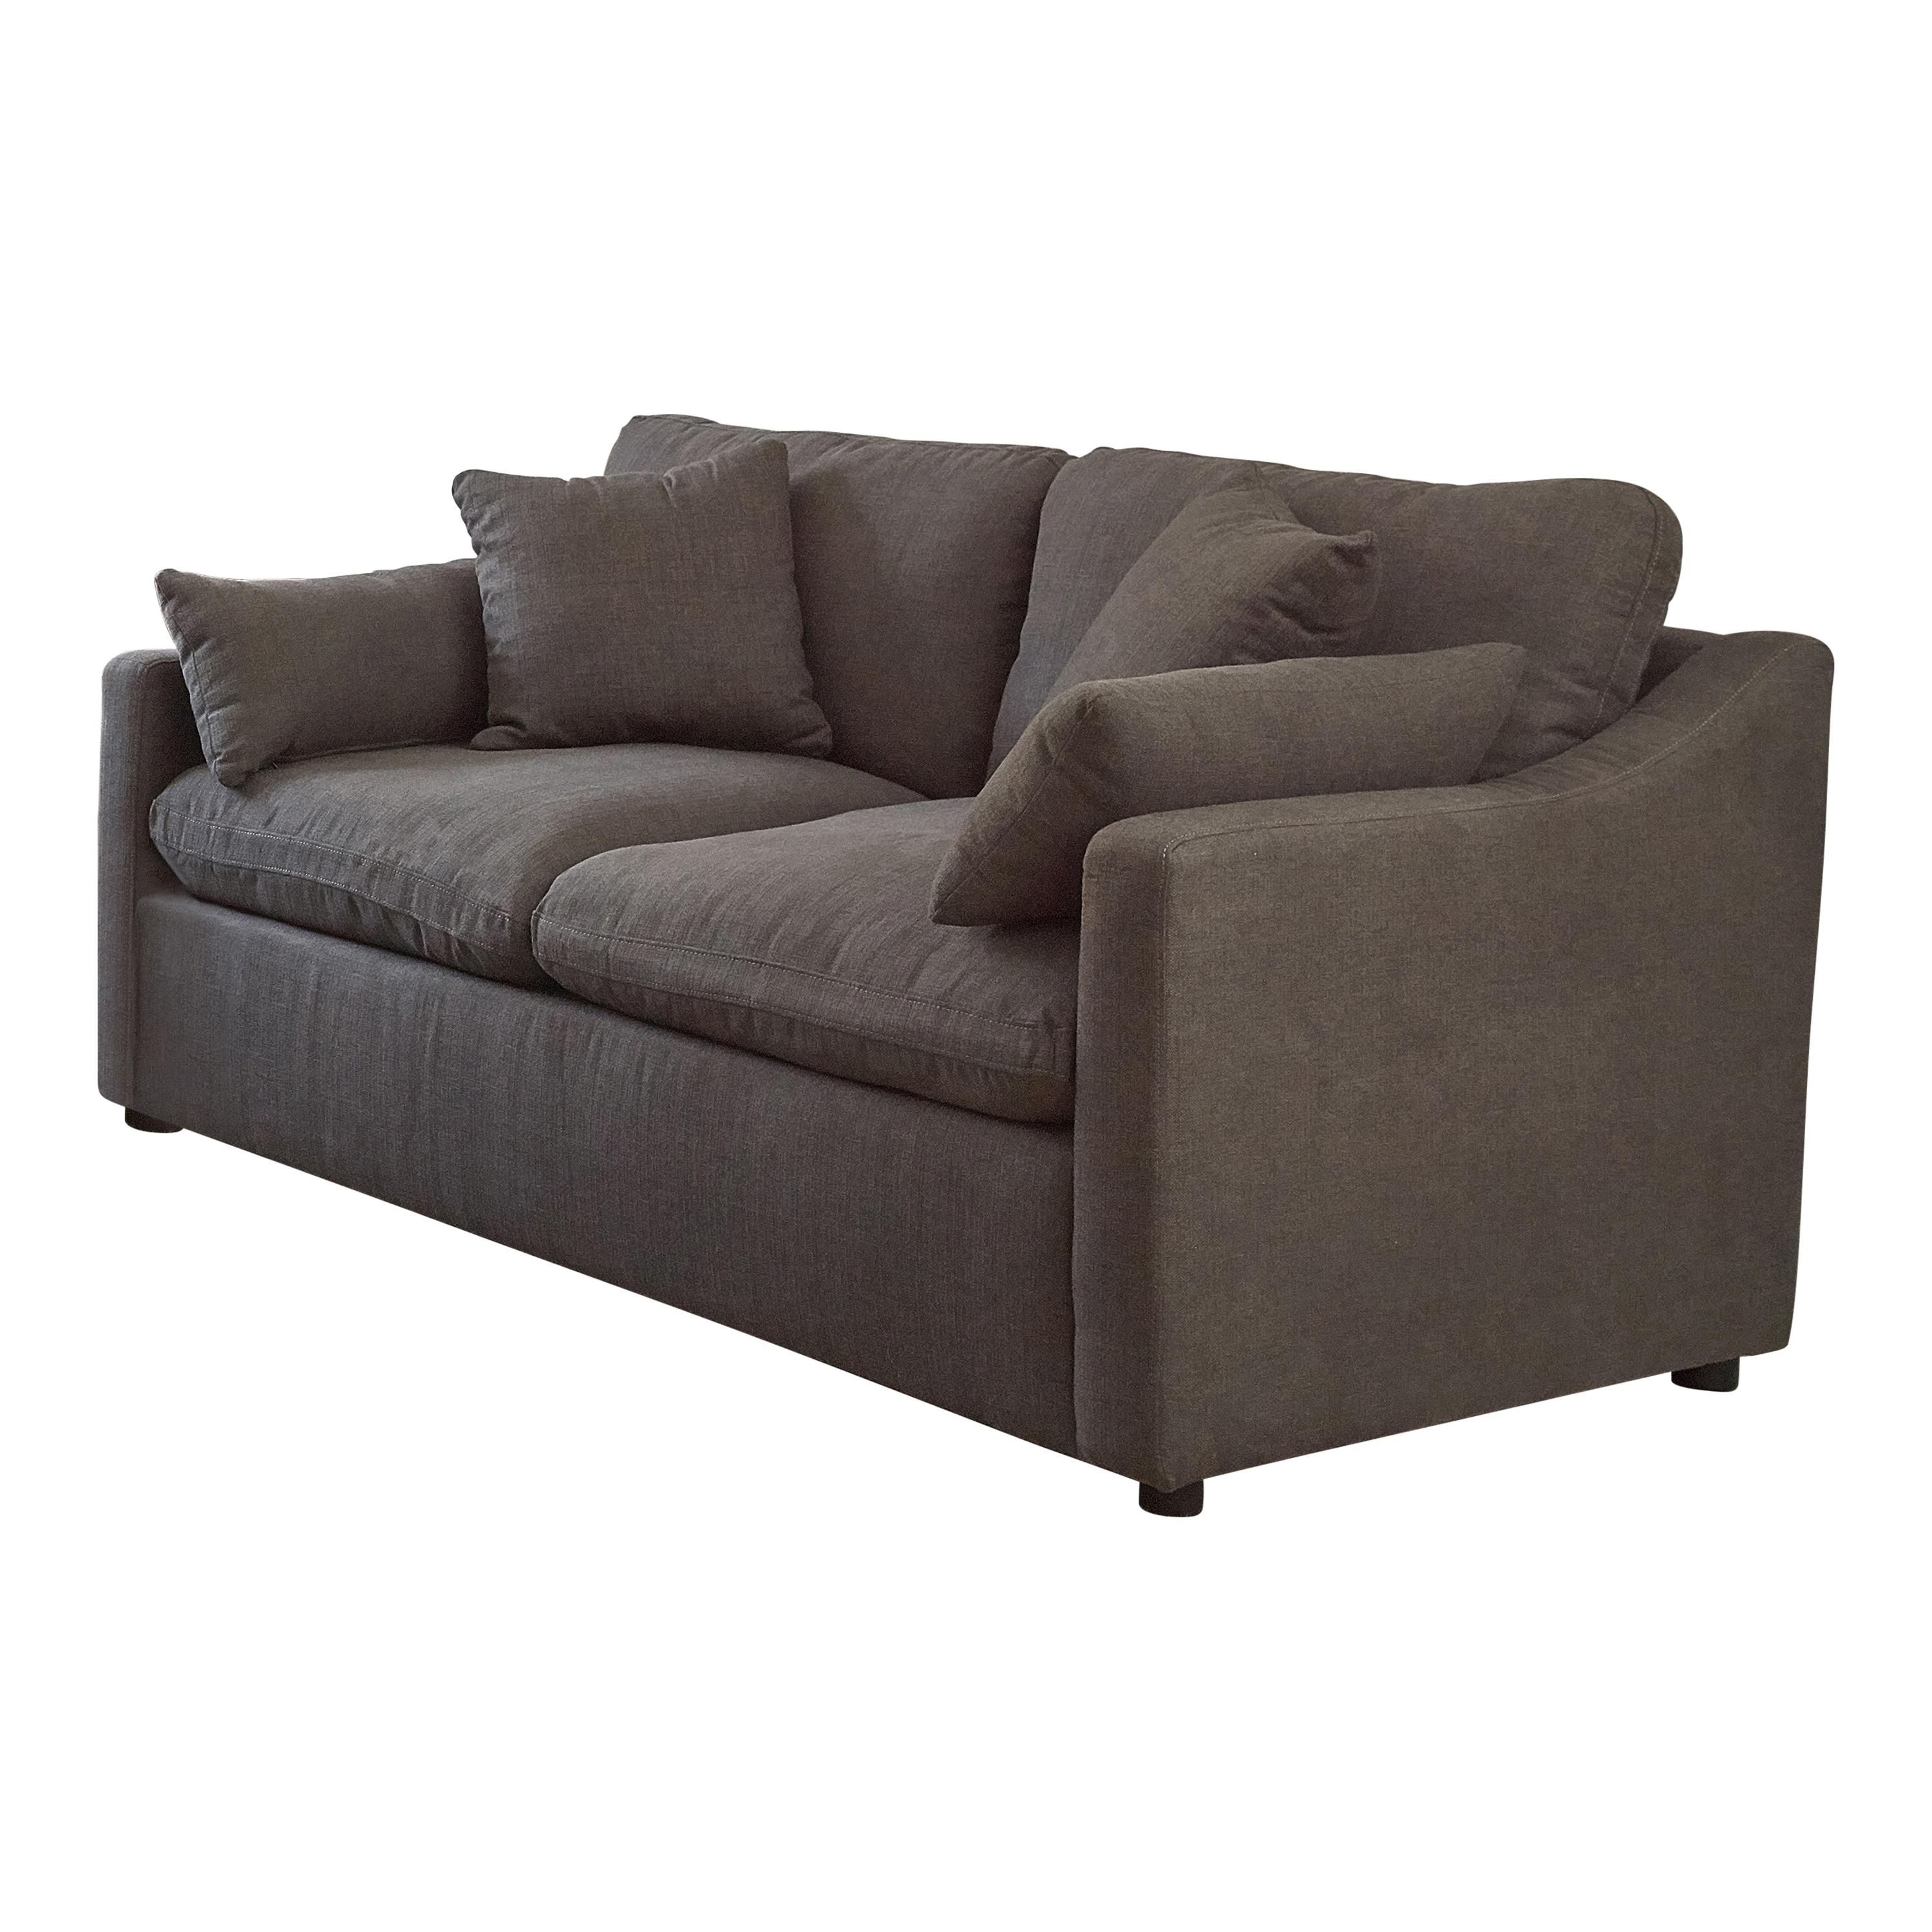 Transitional Loveseat 509382 Contrary 509382 in Charcoal 